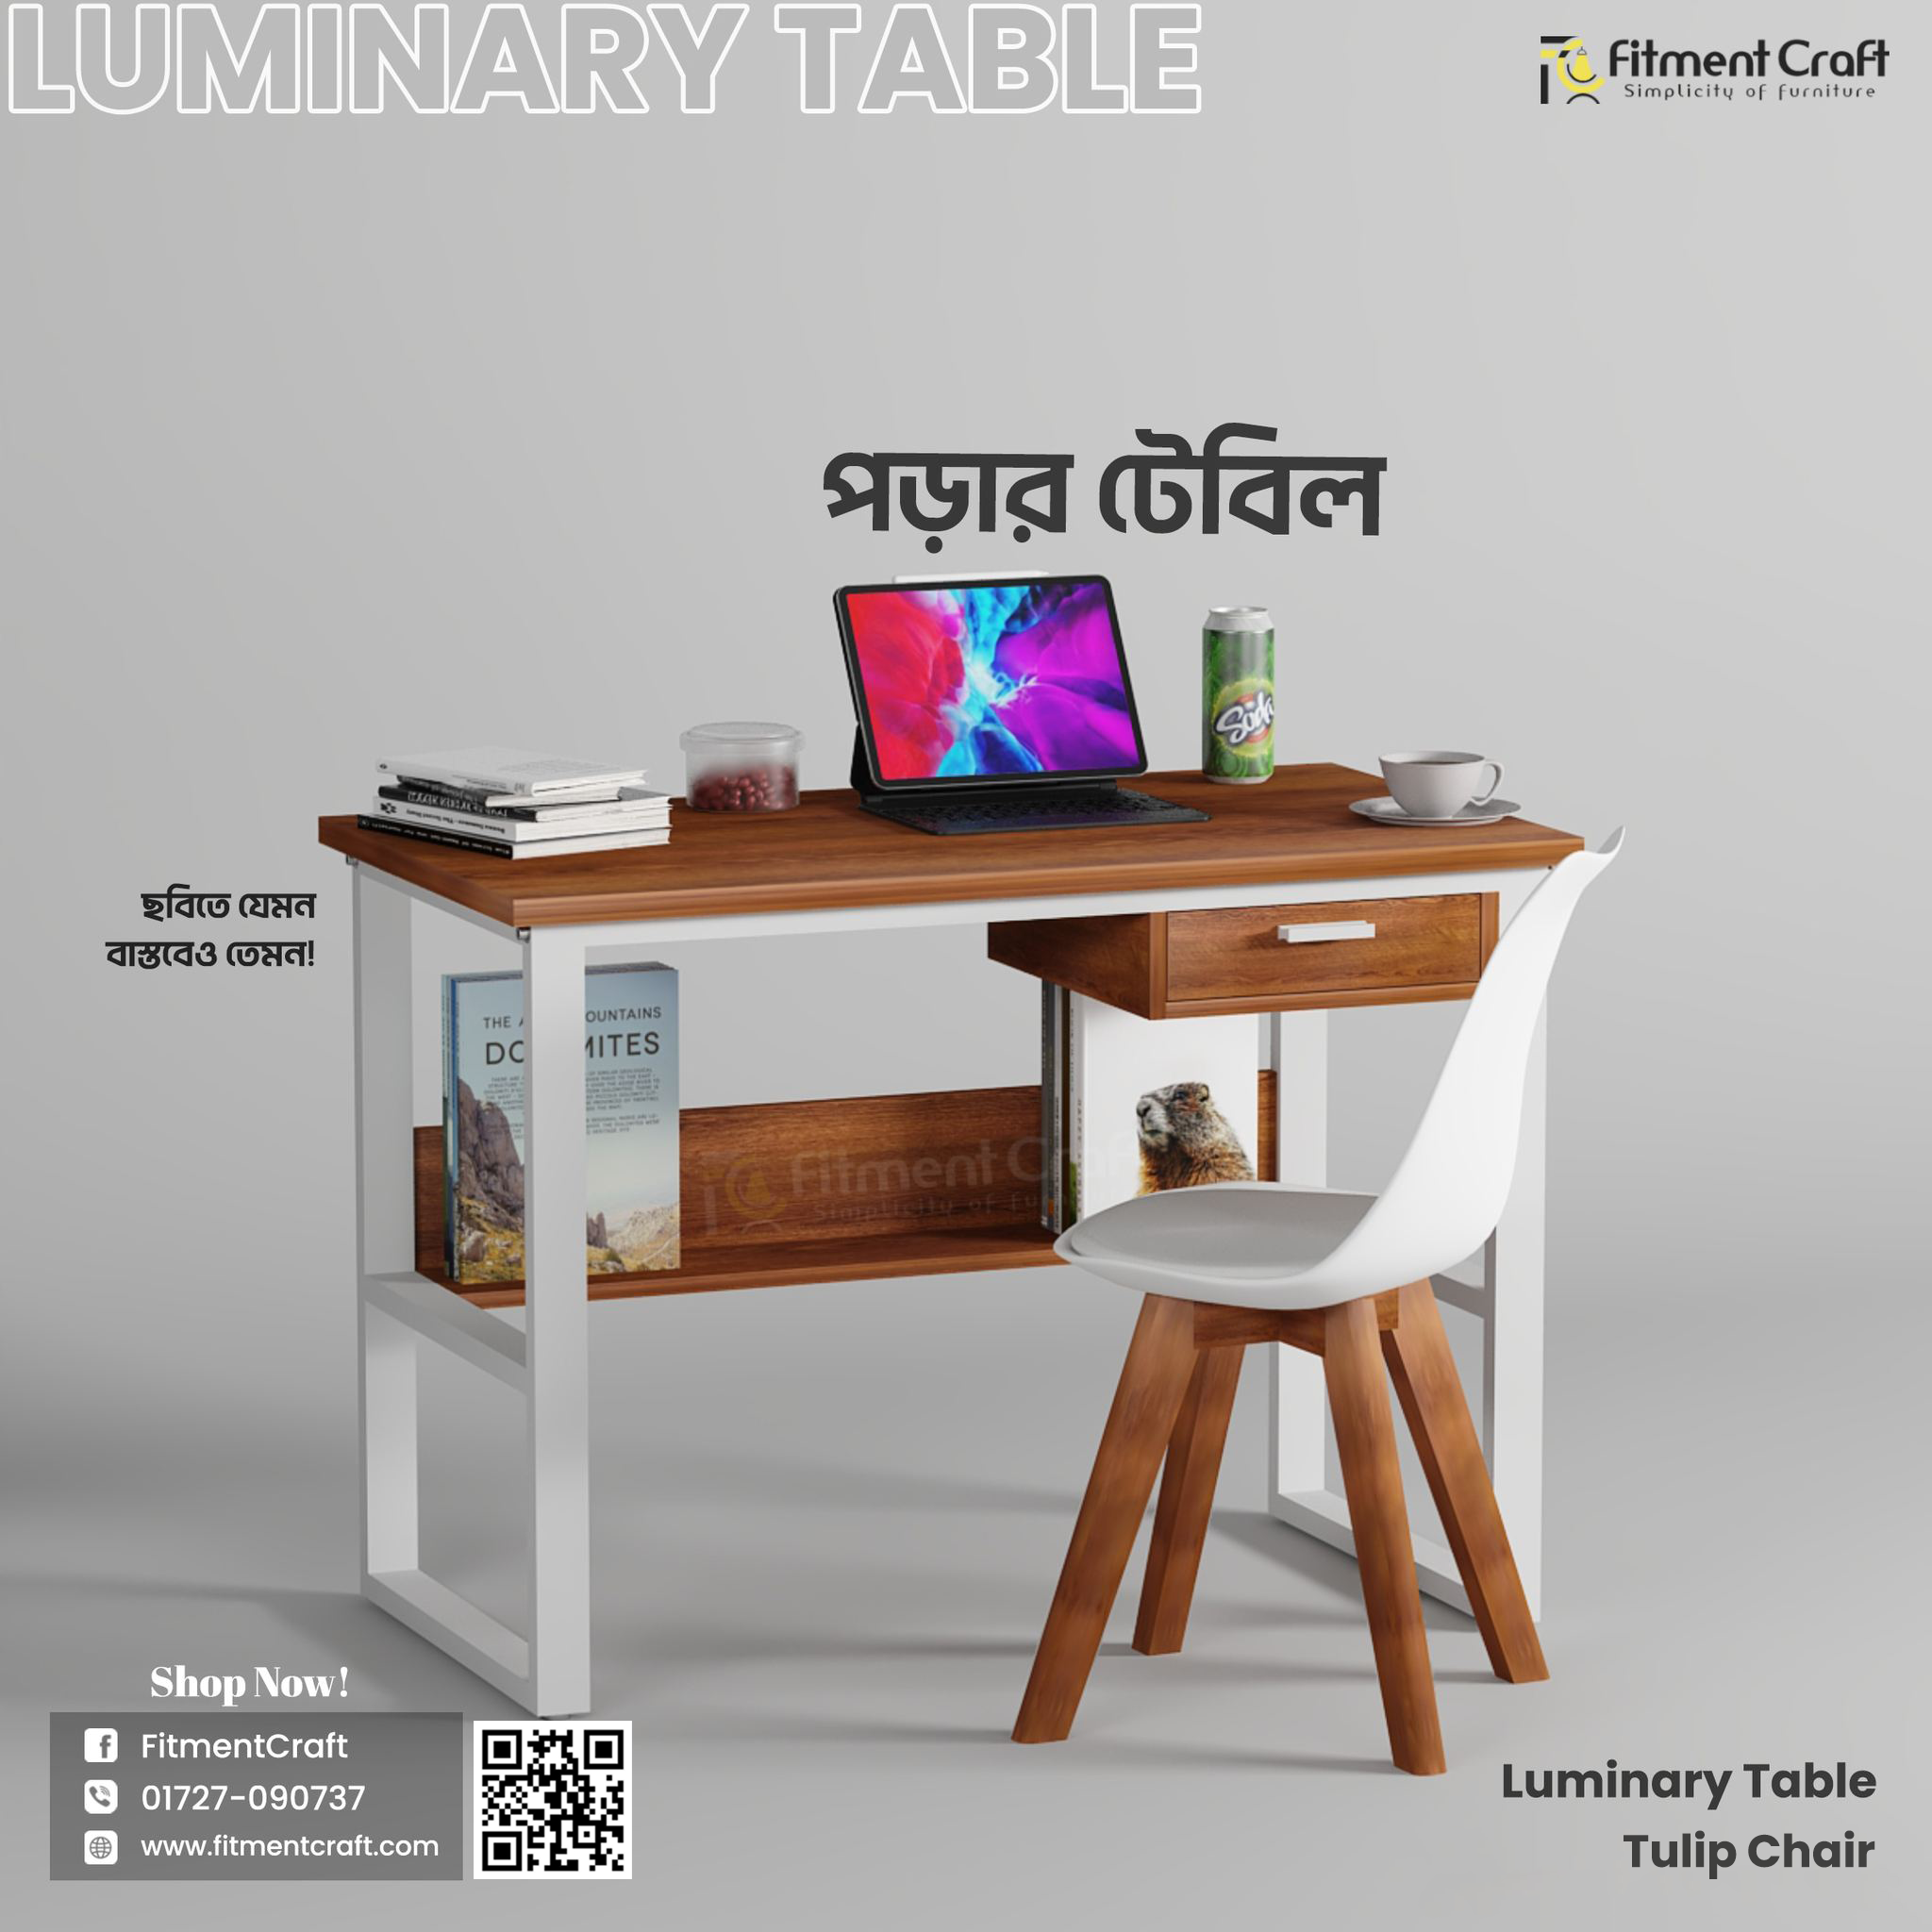 Luminary Table with Tulip Chair | CMB-009